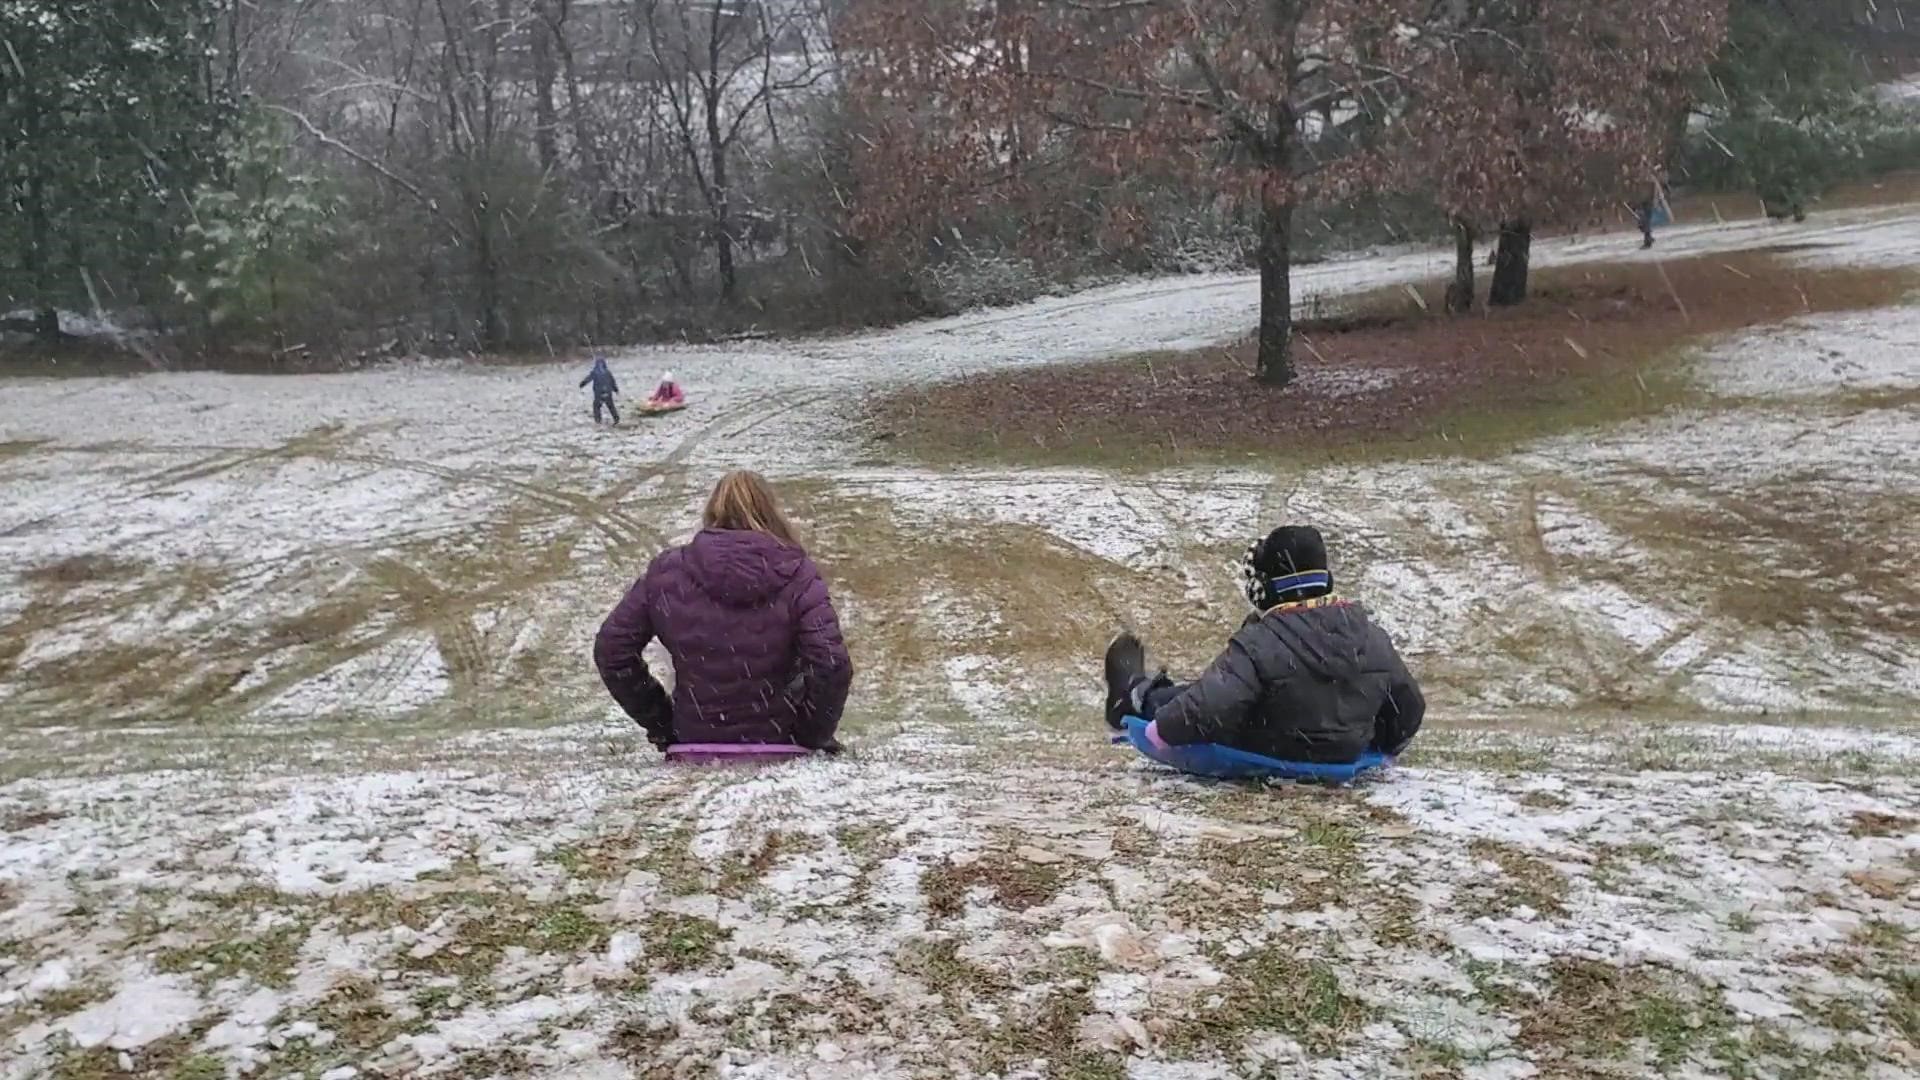 Check them out as they have fun in the show in Cobb, County on this big hill!
Credit: Carmon White